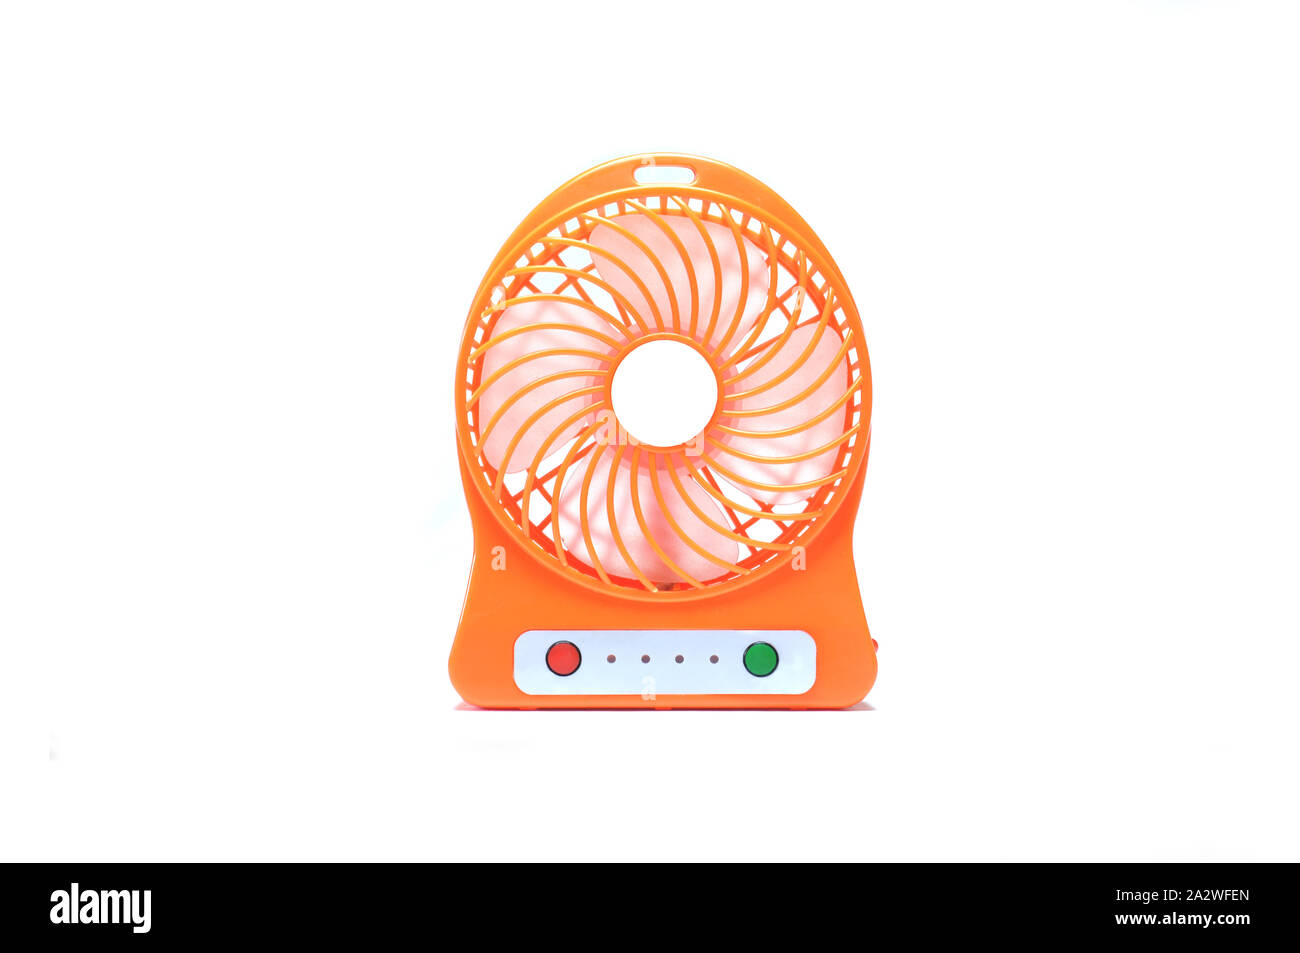 https://c8.alamy.com/comp/2A2WFEN/orange-portable-usb-battery-powered-rechargeable-small-mini-electric-fan-cheap-and-affordable-tech-trend-in-asia-2A2WFEN.jpg